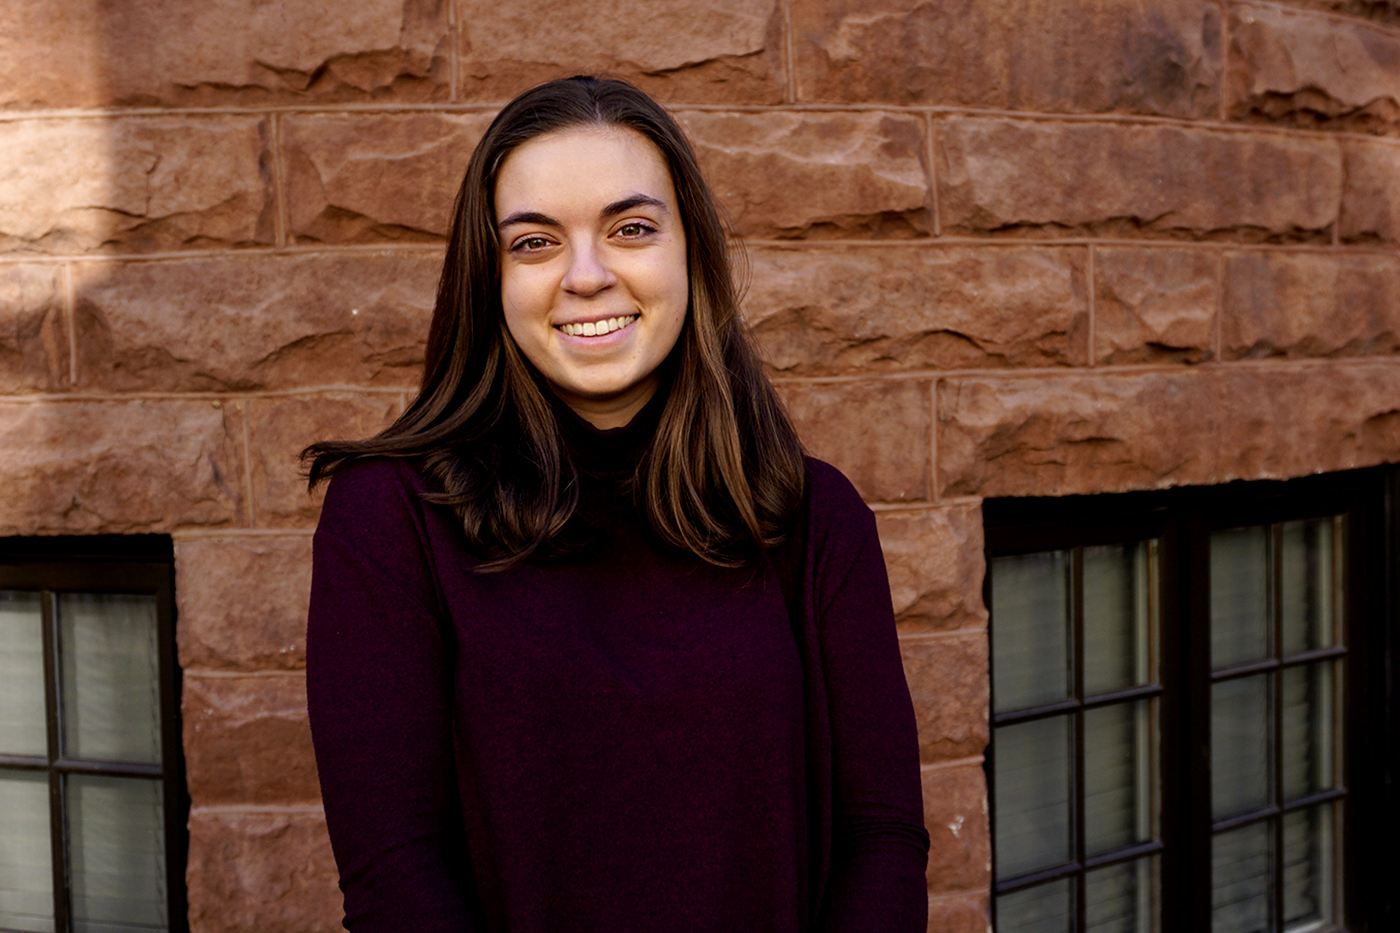 This Truman Scholar is solving global health issues on a local level